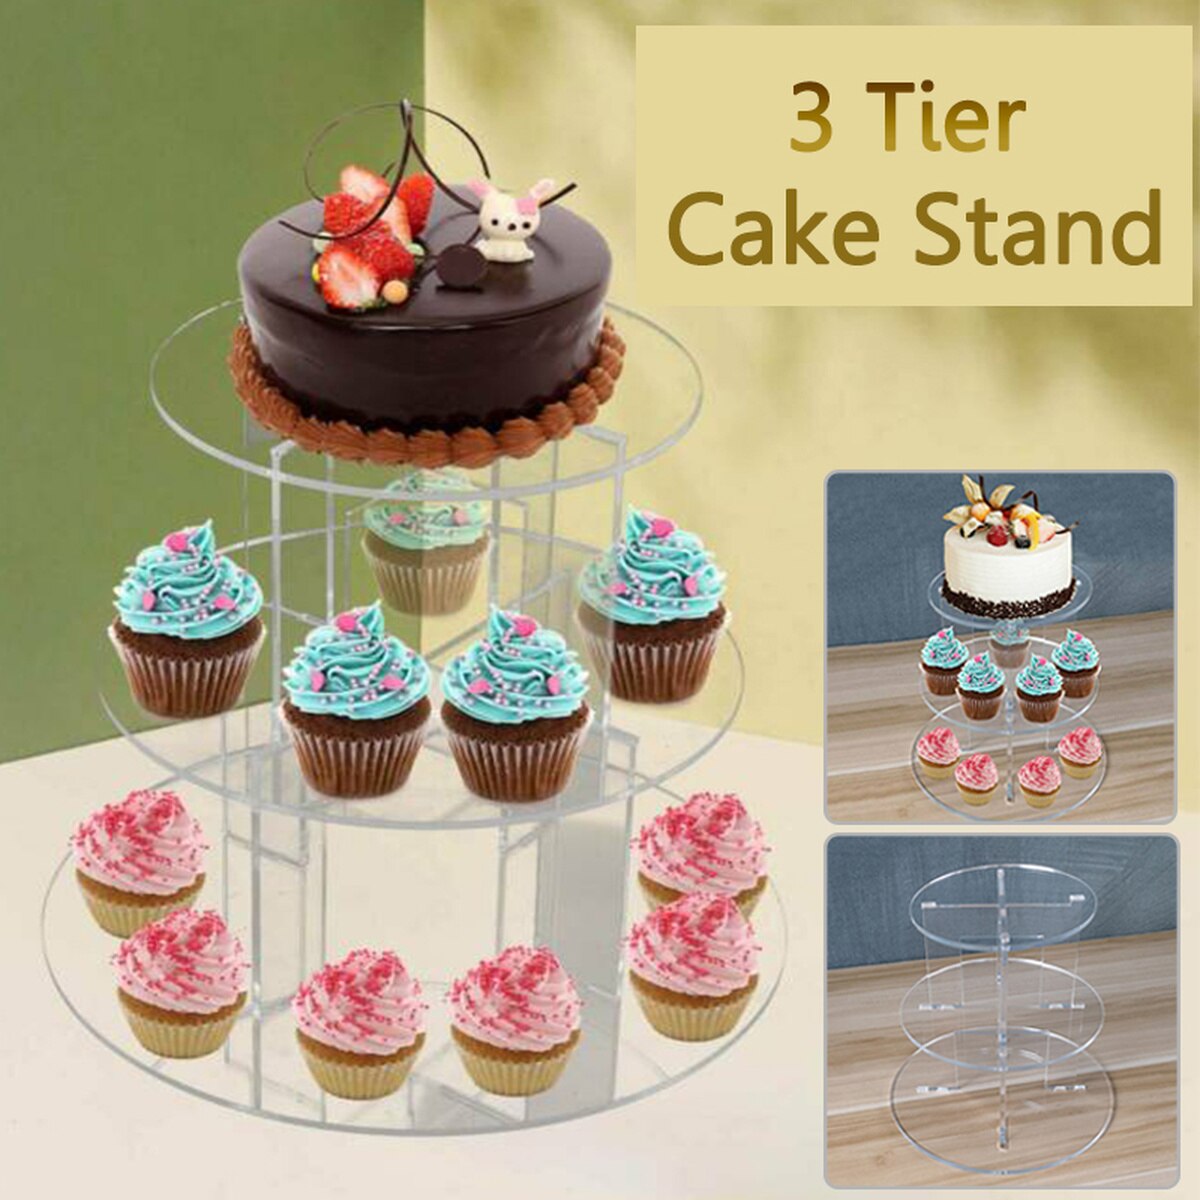 3 Tier Ronde Cake Stand Transparant Acryl Display Stand Wedding Party Supplies Duurzaam Dessert Lade Decoratie Tool Cake Stand